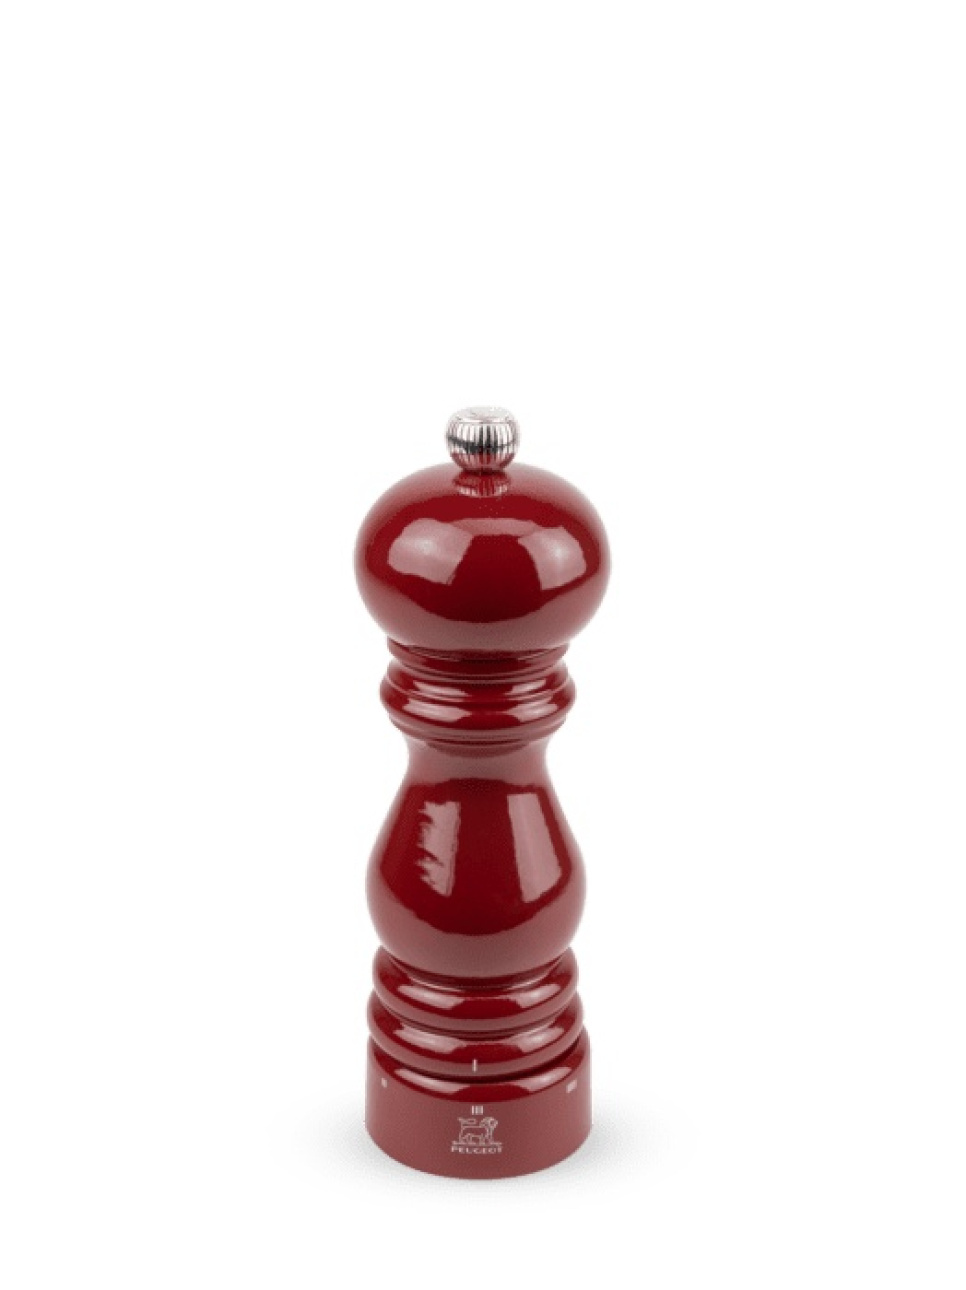 Paris Pepper mill 18 cm, U Select, Red - Peugeot in the group Cooking / Kitchen utensils / Salt & pepper mills at KitchenLab (1090-13452)